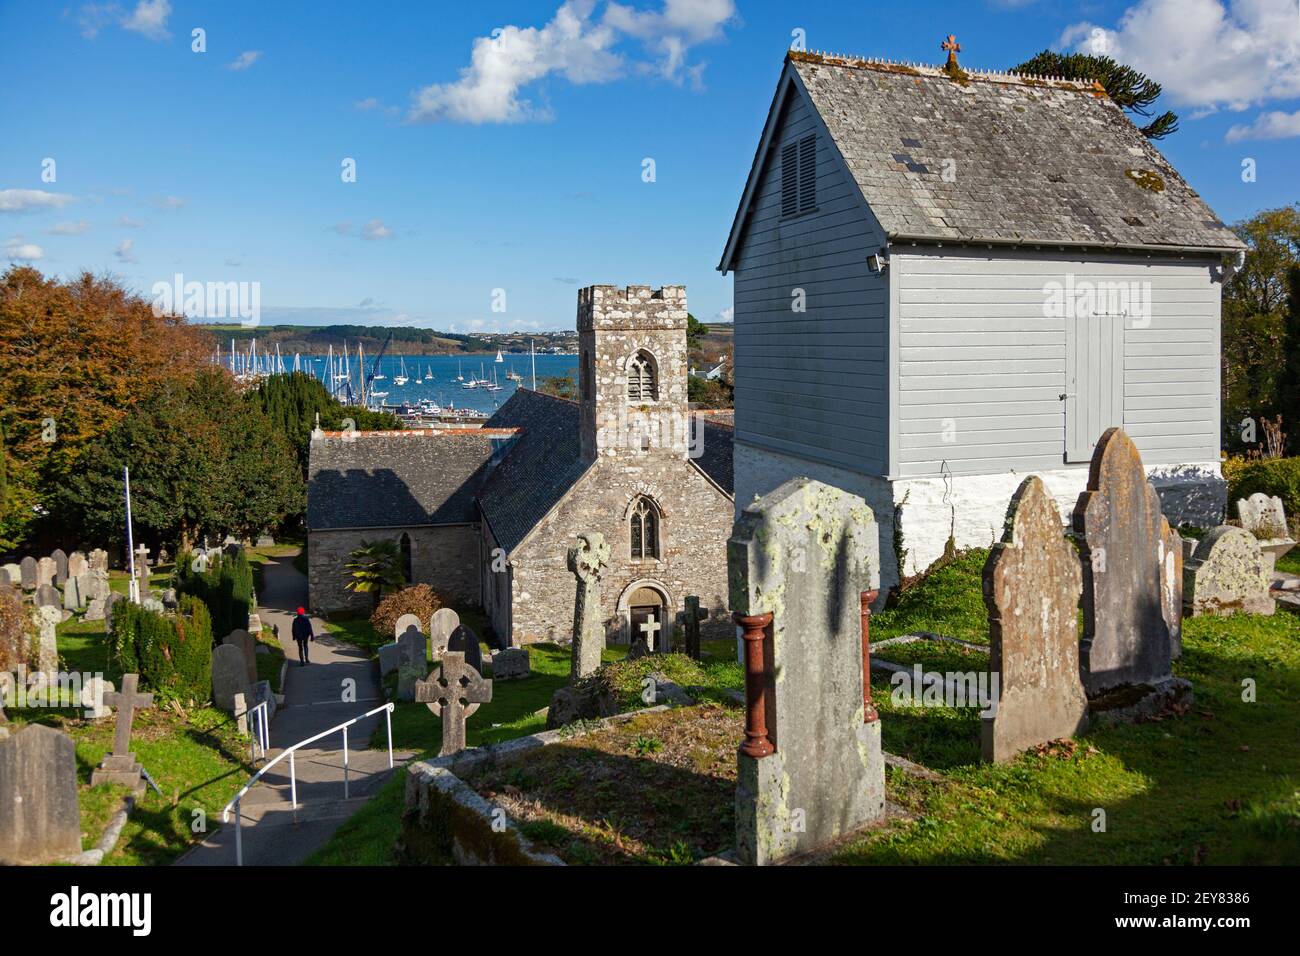 Views out to coastal waters across the roof and tower of  the Parish coastal Church of St Mylor in Cornwall, UK Stock Photo